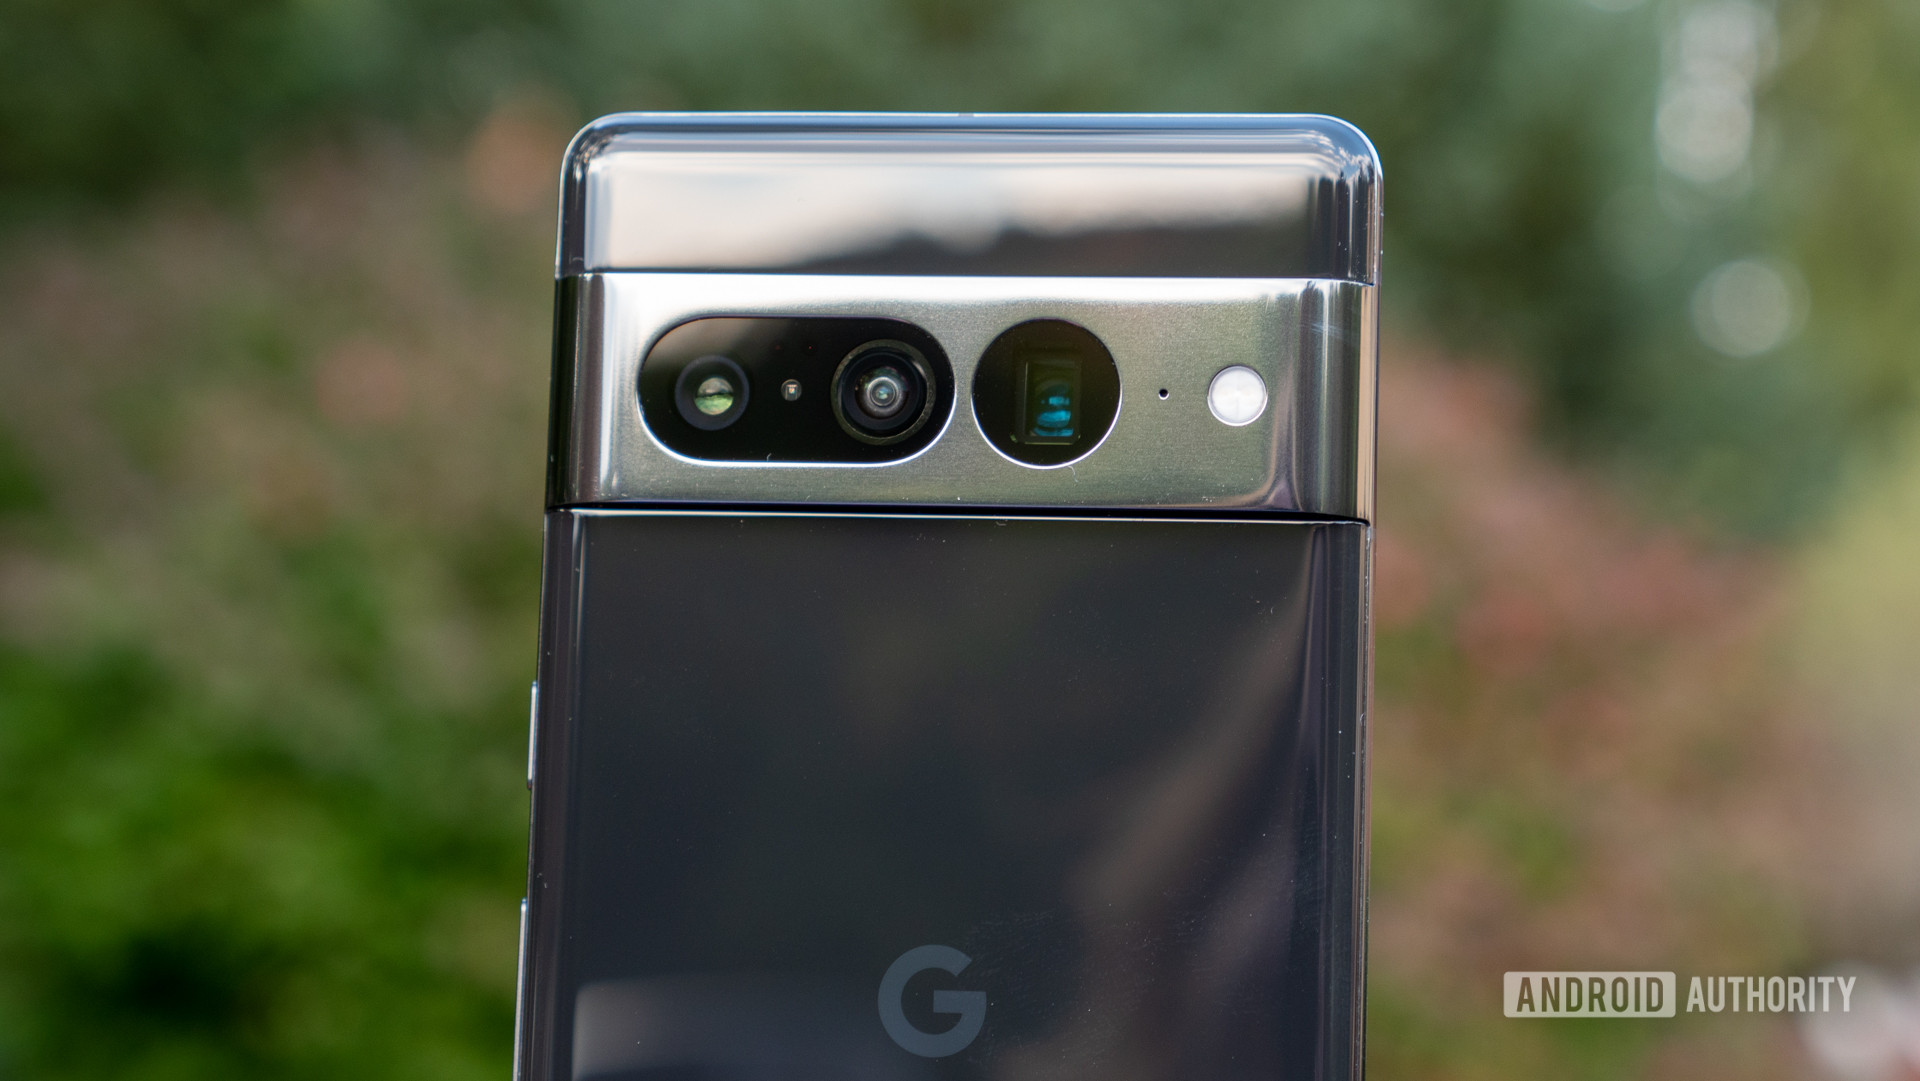 We asked, you told us: Google might have a winner with the Pixel 7 series